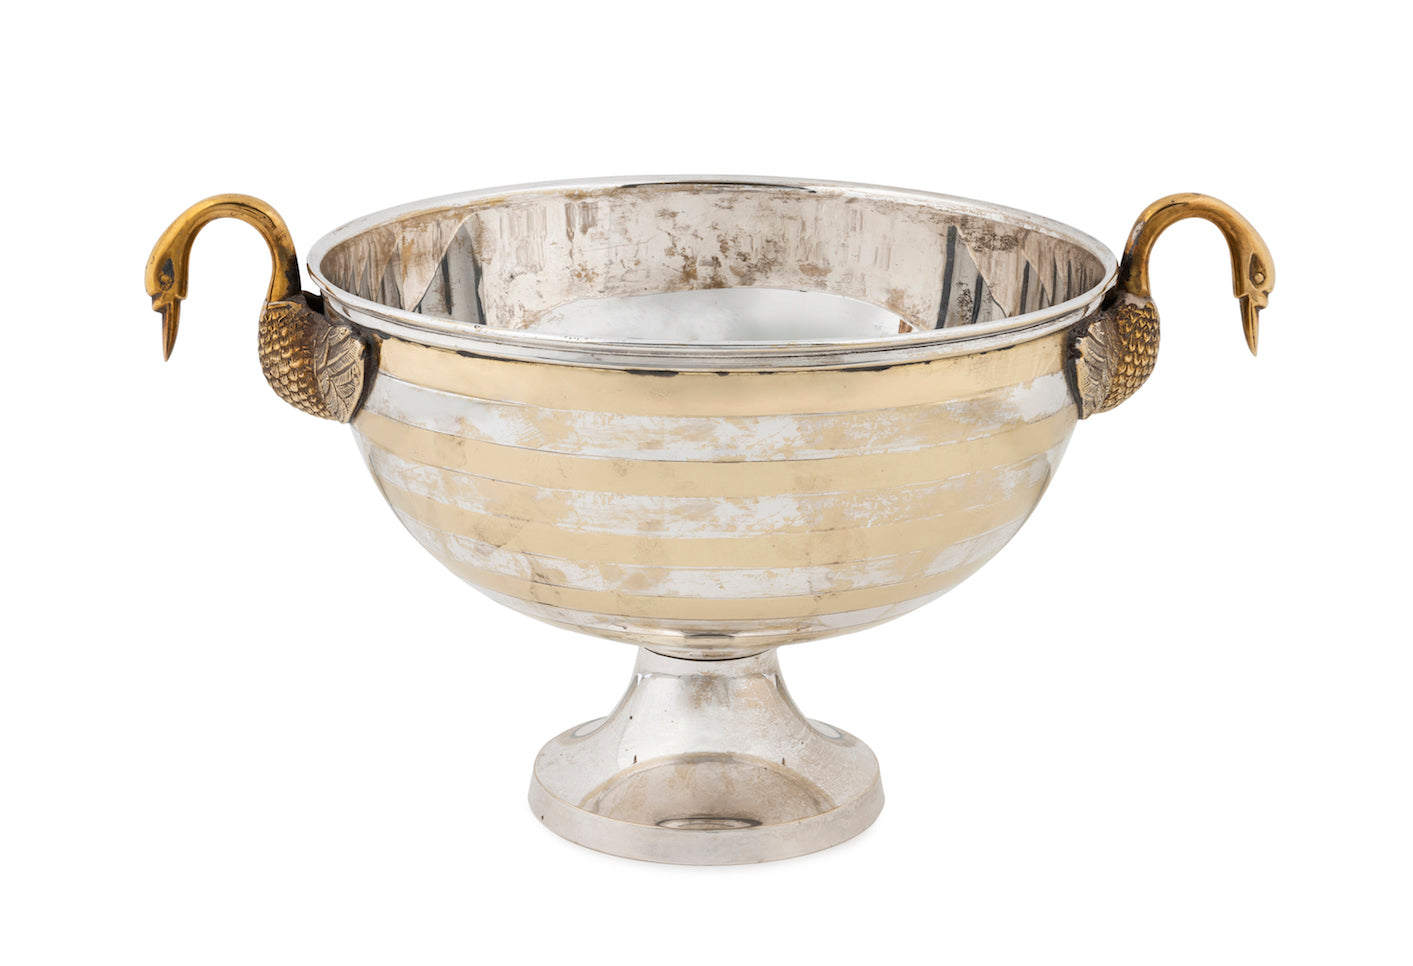 SOLD An unusual brass and silver plate striped wine cooler with twin swan form handles, Indian Circa 1950